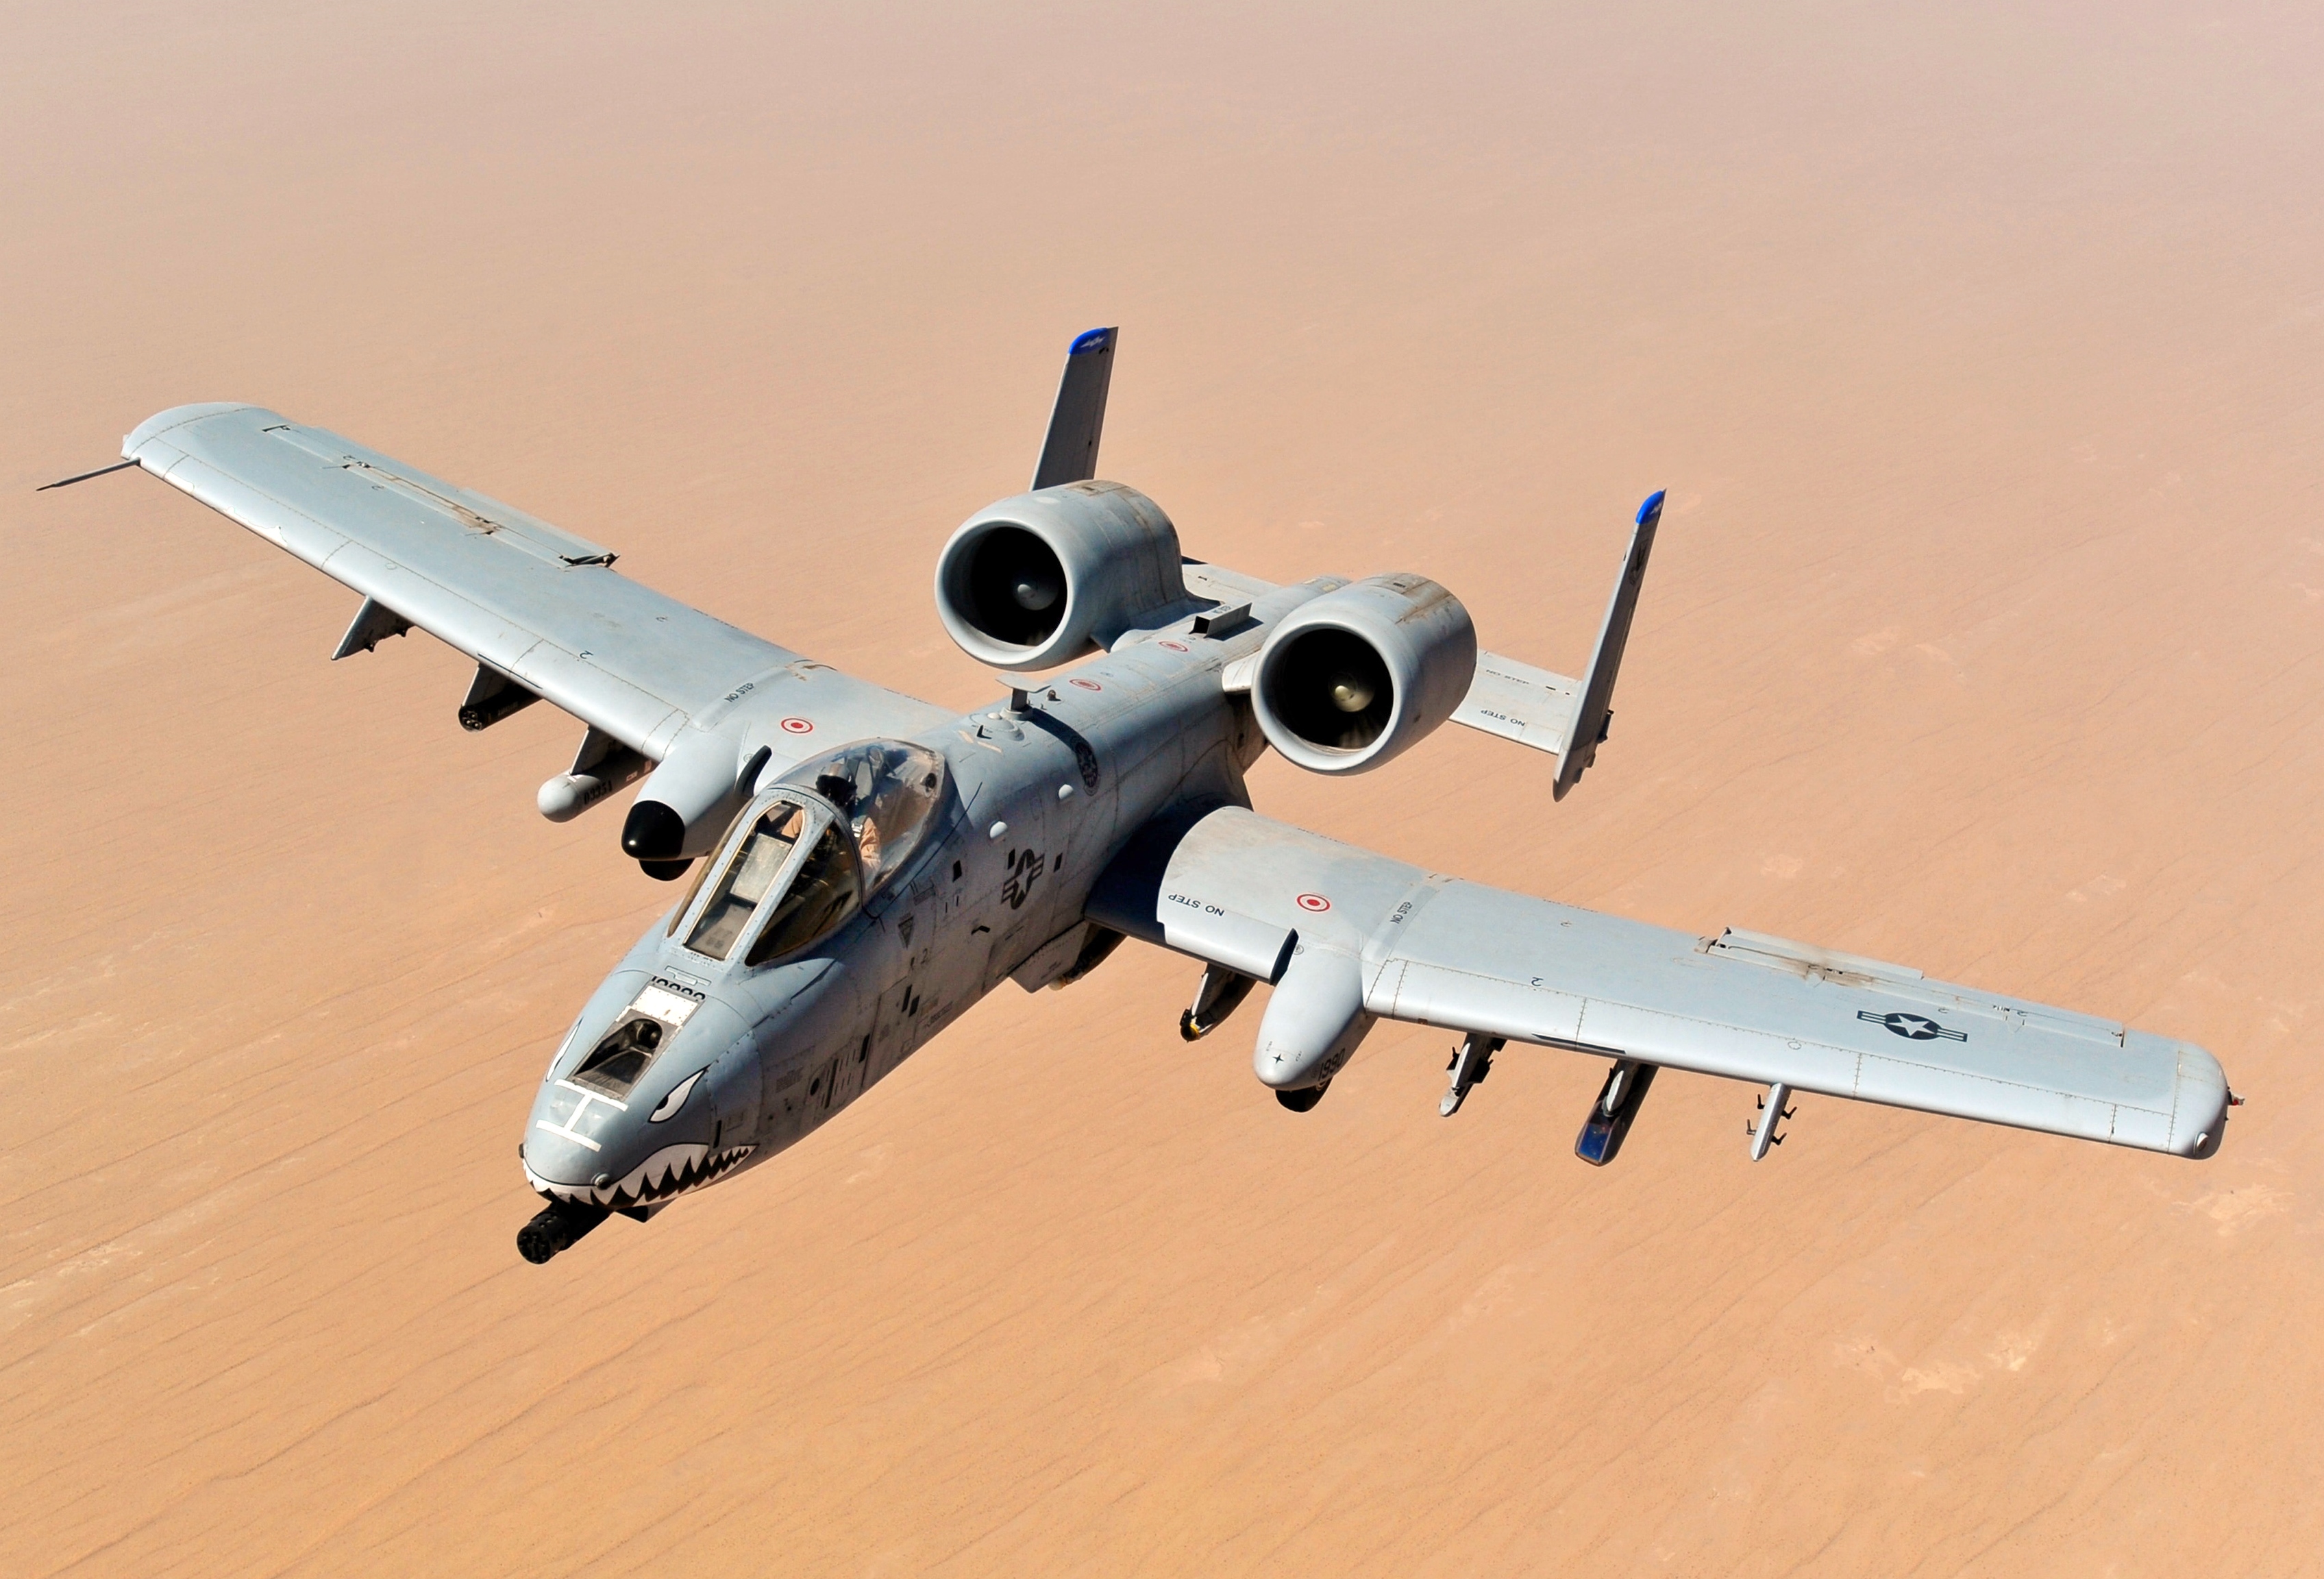 US to send old A-10 attack planes to Mideast and shift newer jets to Asia, Europe - WSJ